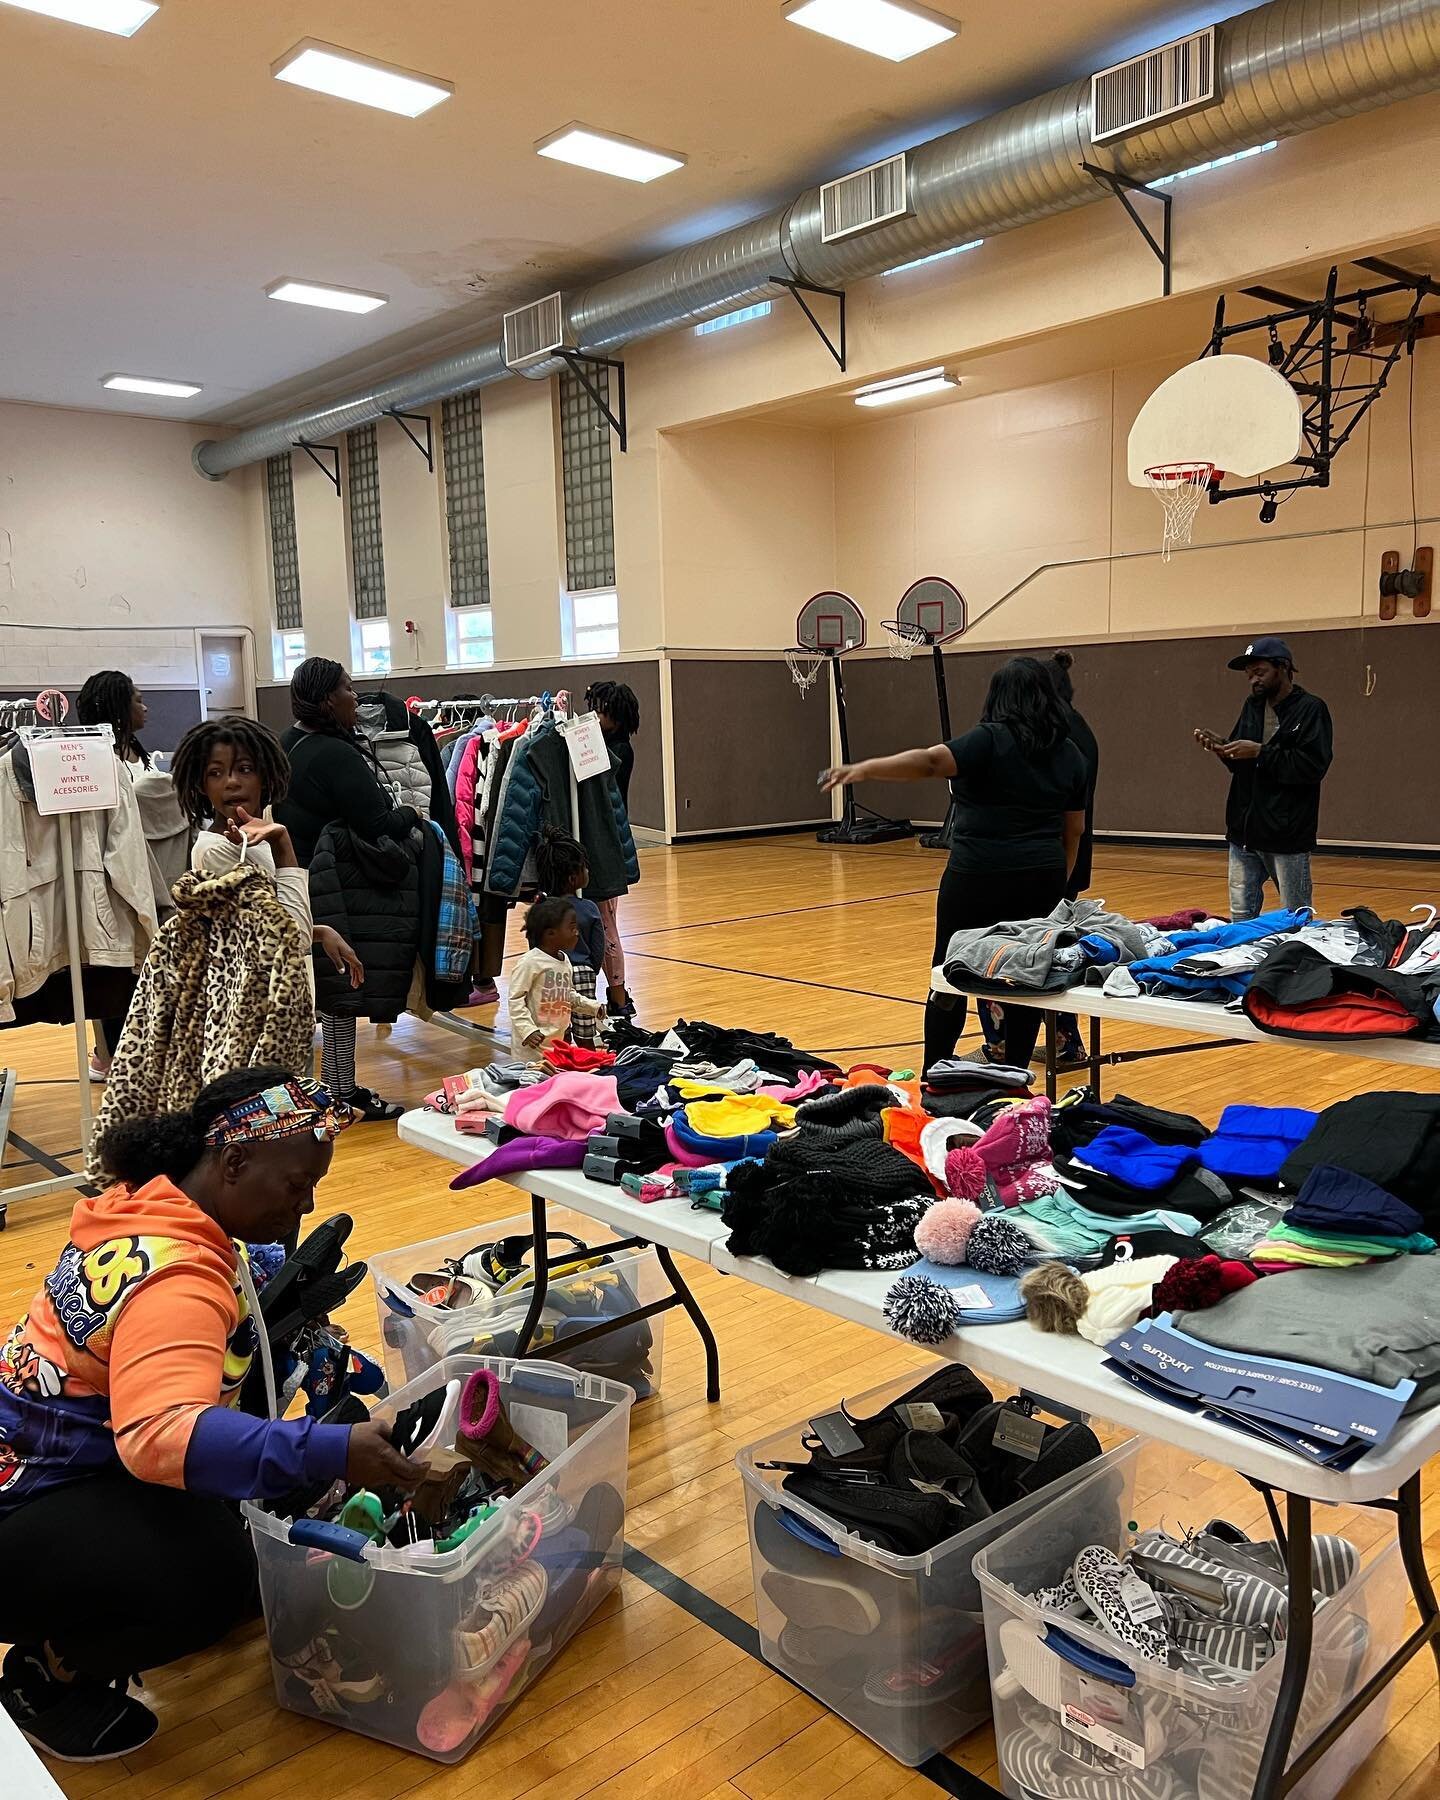 We did it! The first annual KZer0 coat drive was a success. We exceeded our expectations by having over 150 coats, hats and gloves for families in need this winter. Thank you to each organization that donated and each individual that gave as well. Ou